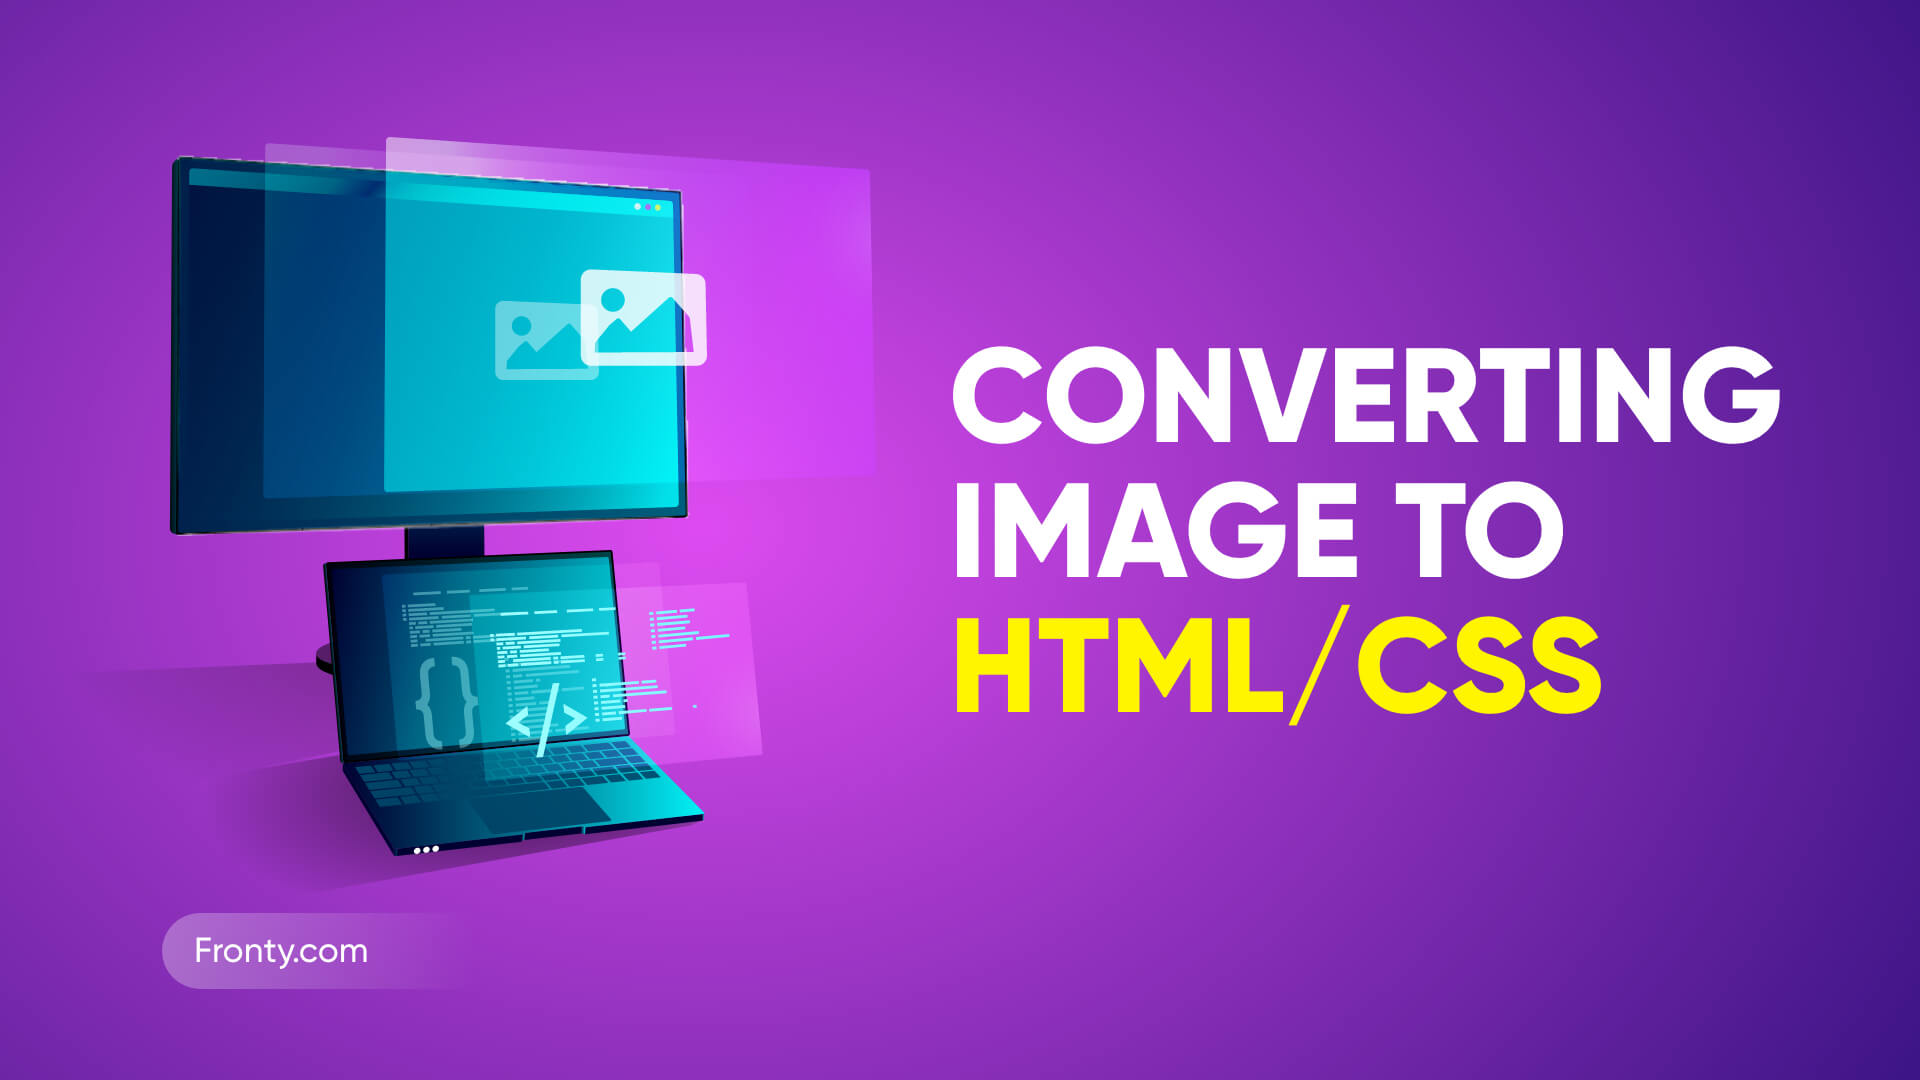 Converting Image to HTML/CSS